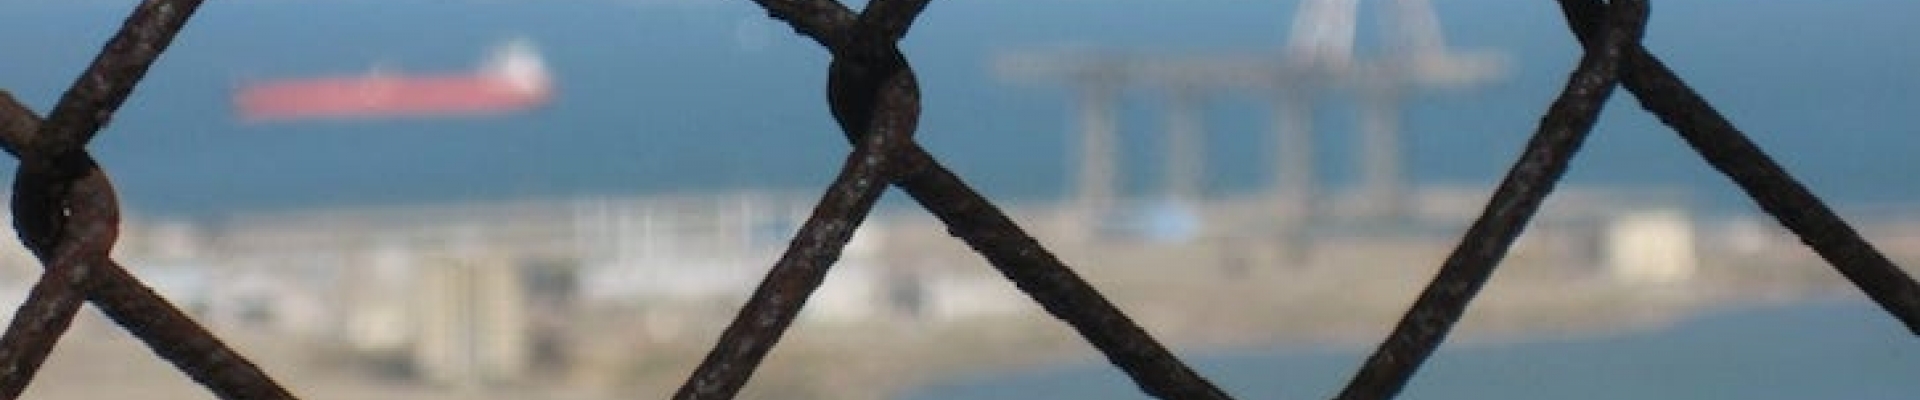 View of SF Bay and Hunter's Point through a chain fence